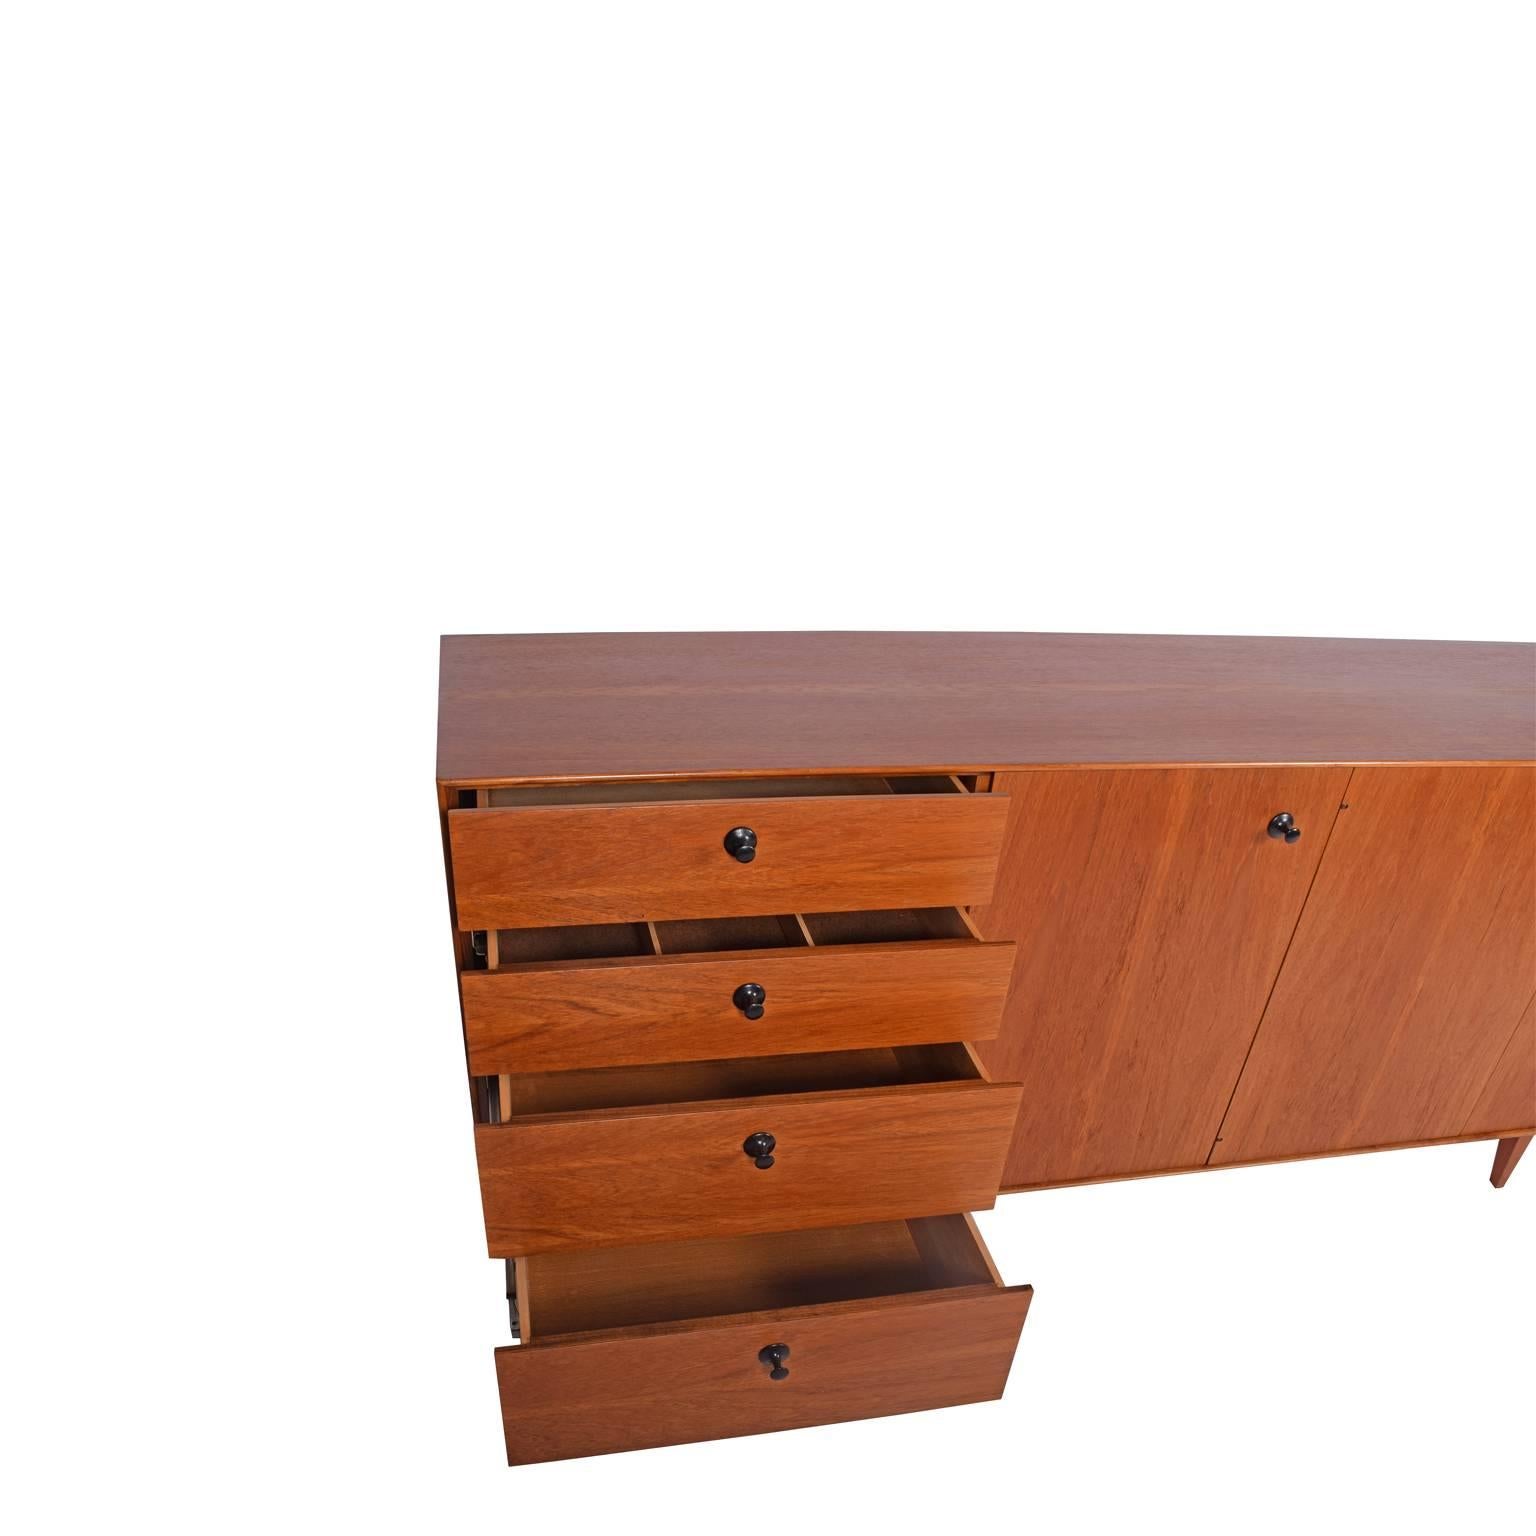 Mid-20th Century Teak Thin Edge Cabinet by George Nelson and Associates for Herman Miller